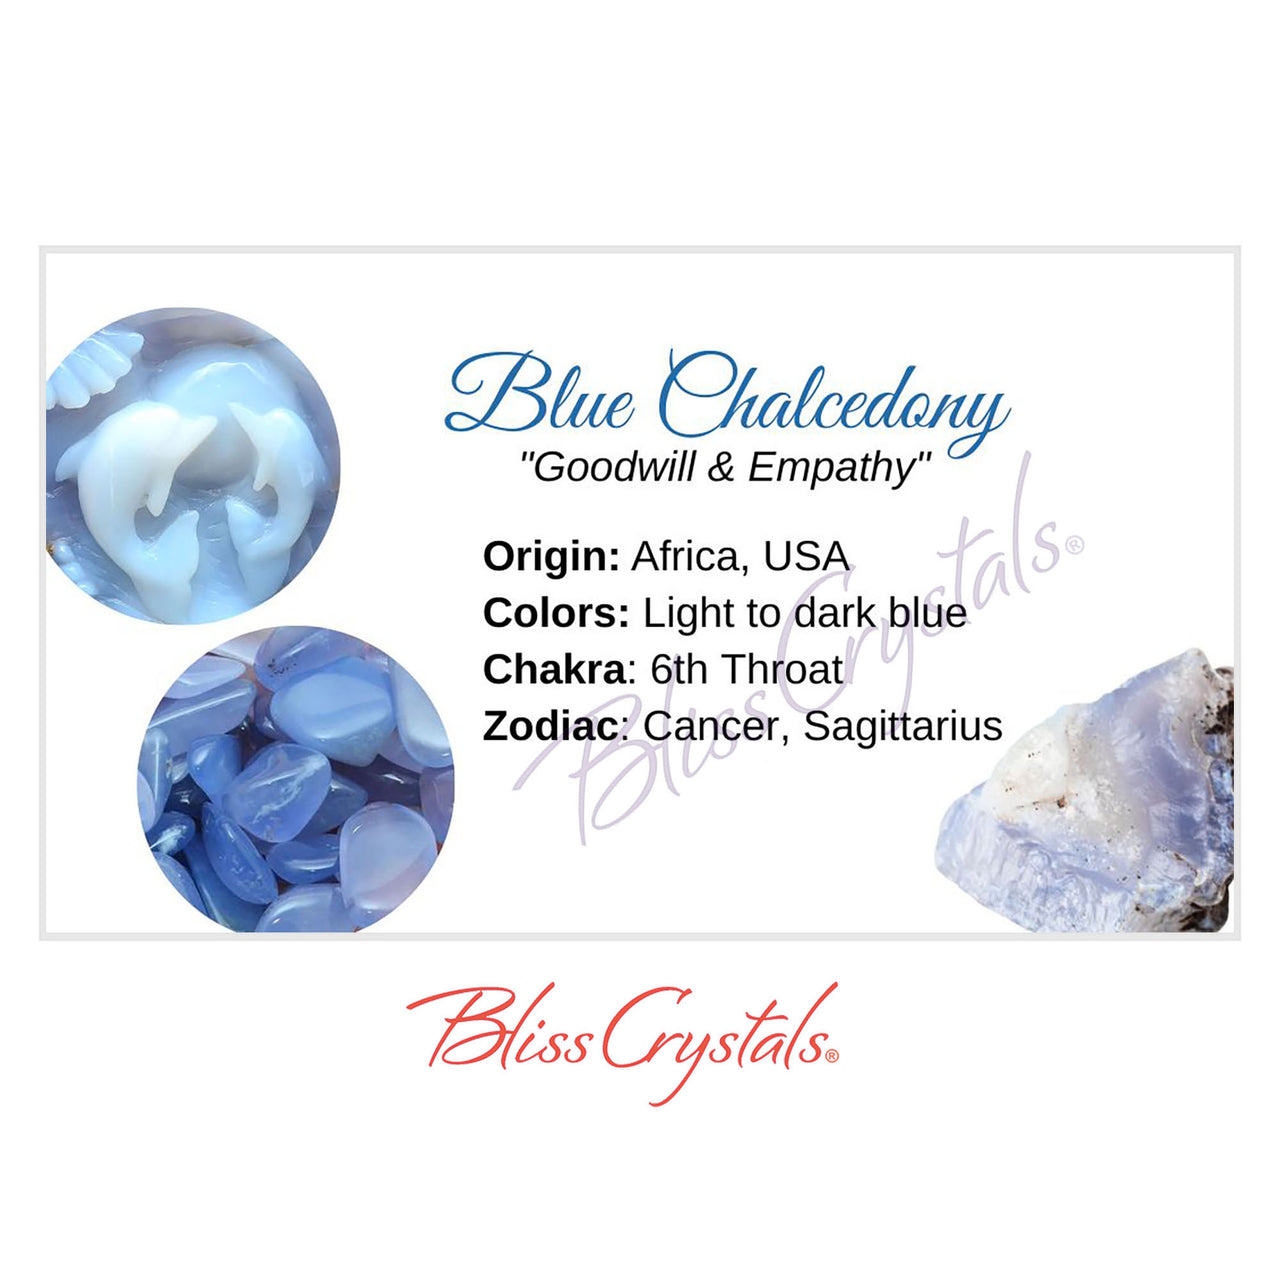 BLUE CHALCEDONY Crystal Information Card, Double sided #HC15